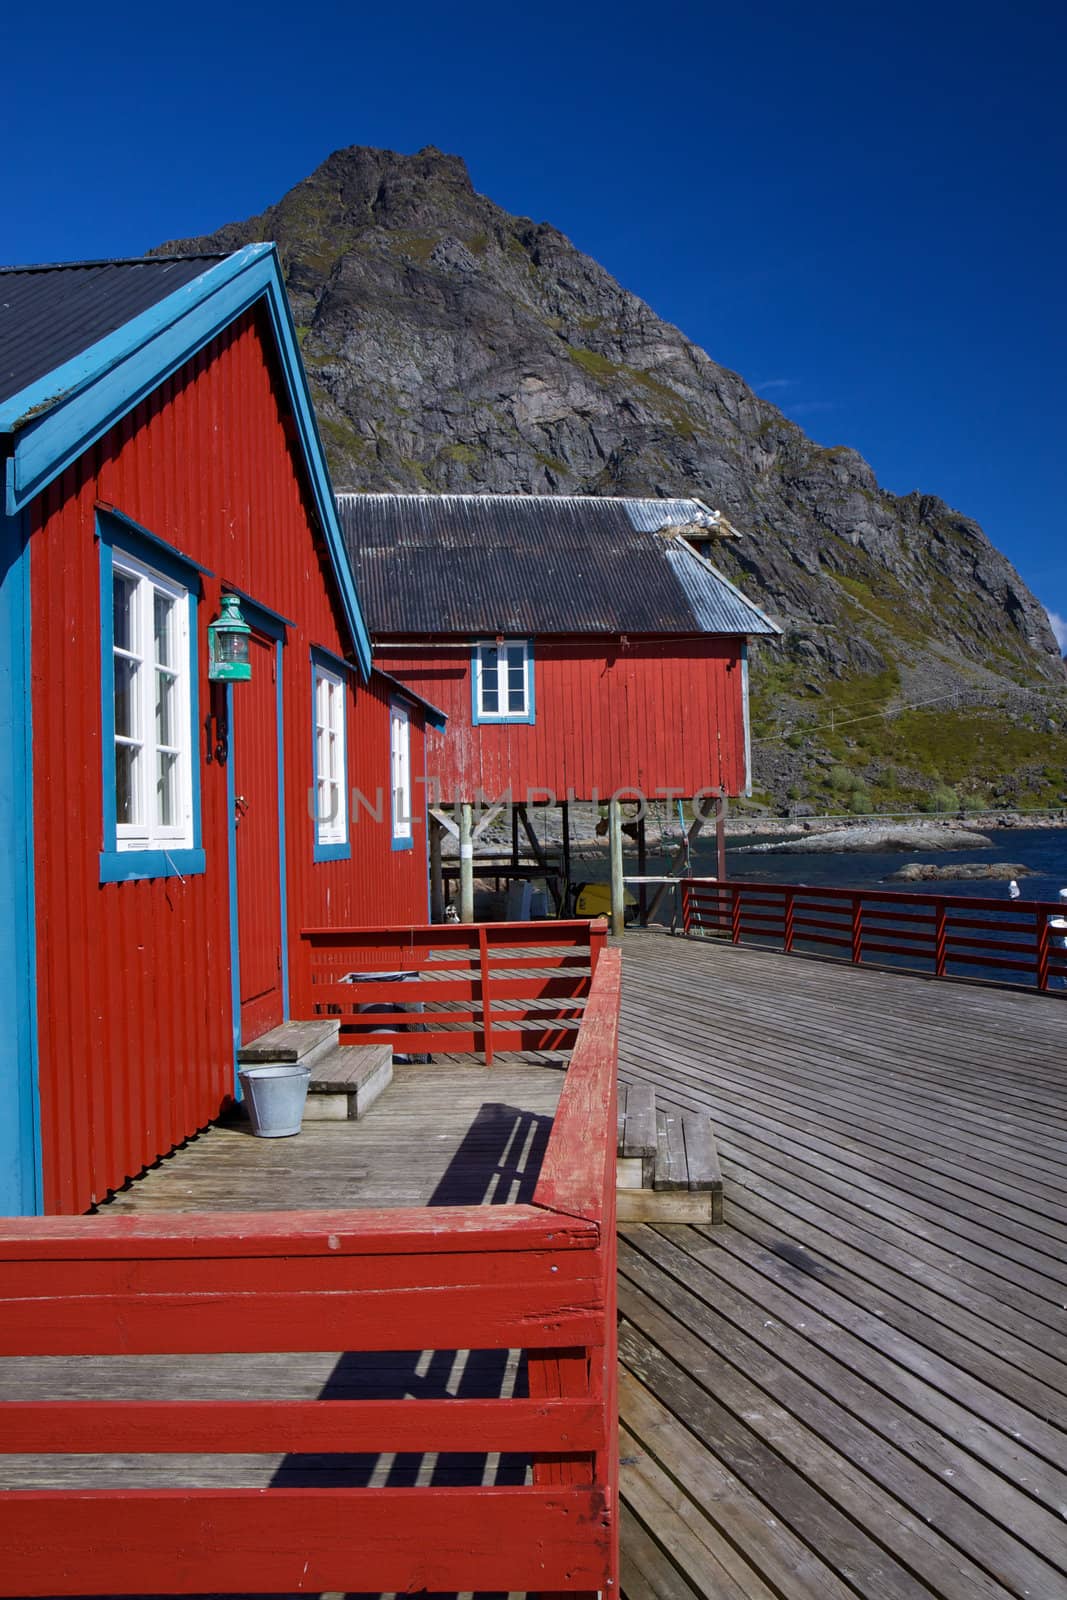 Typical red rorbu fishing huts on Lofoten islands in Norway